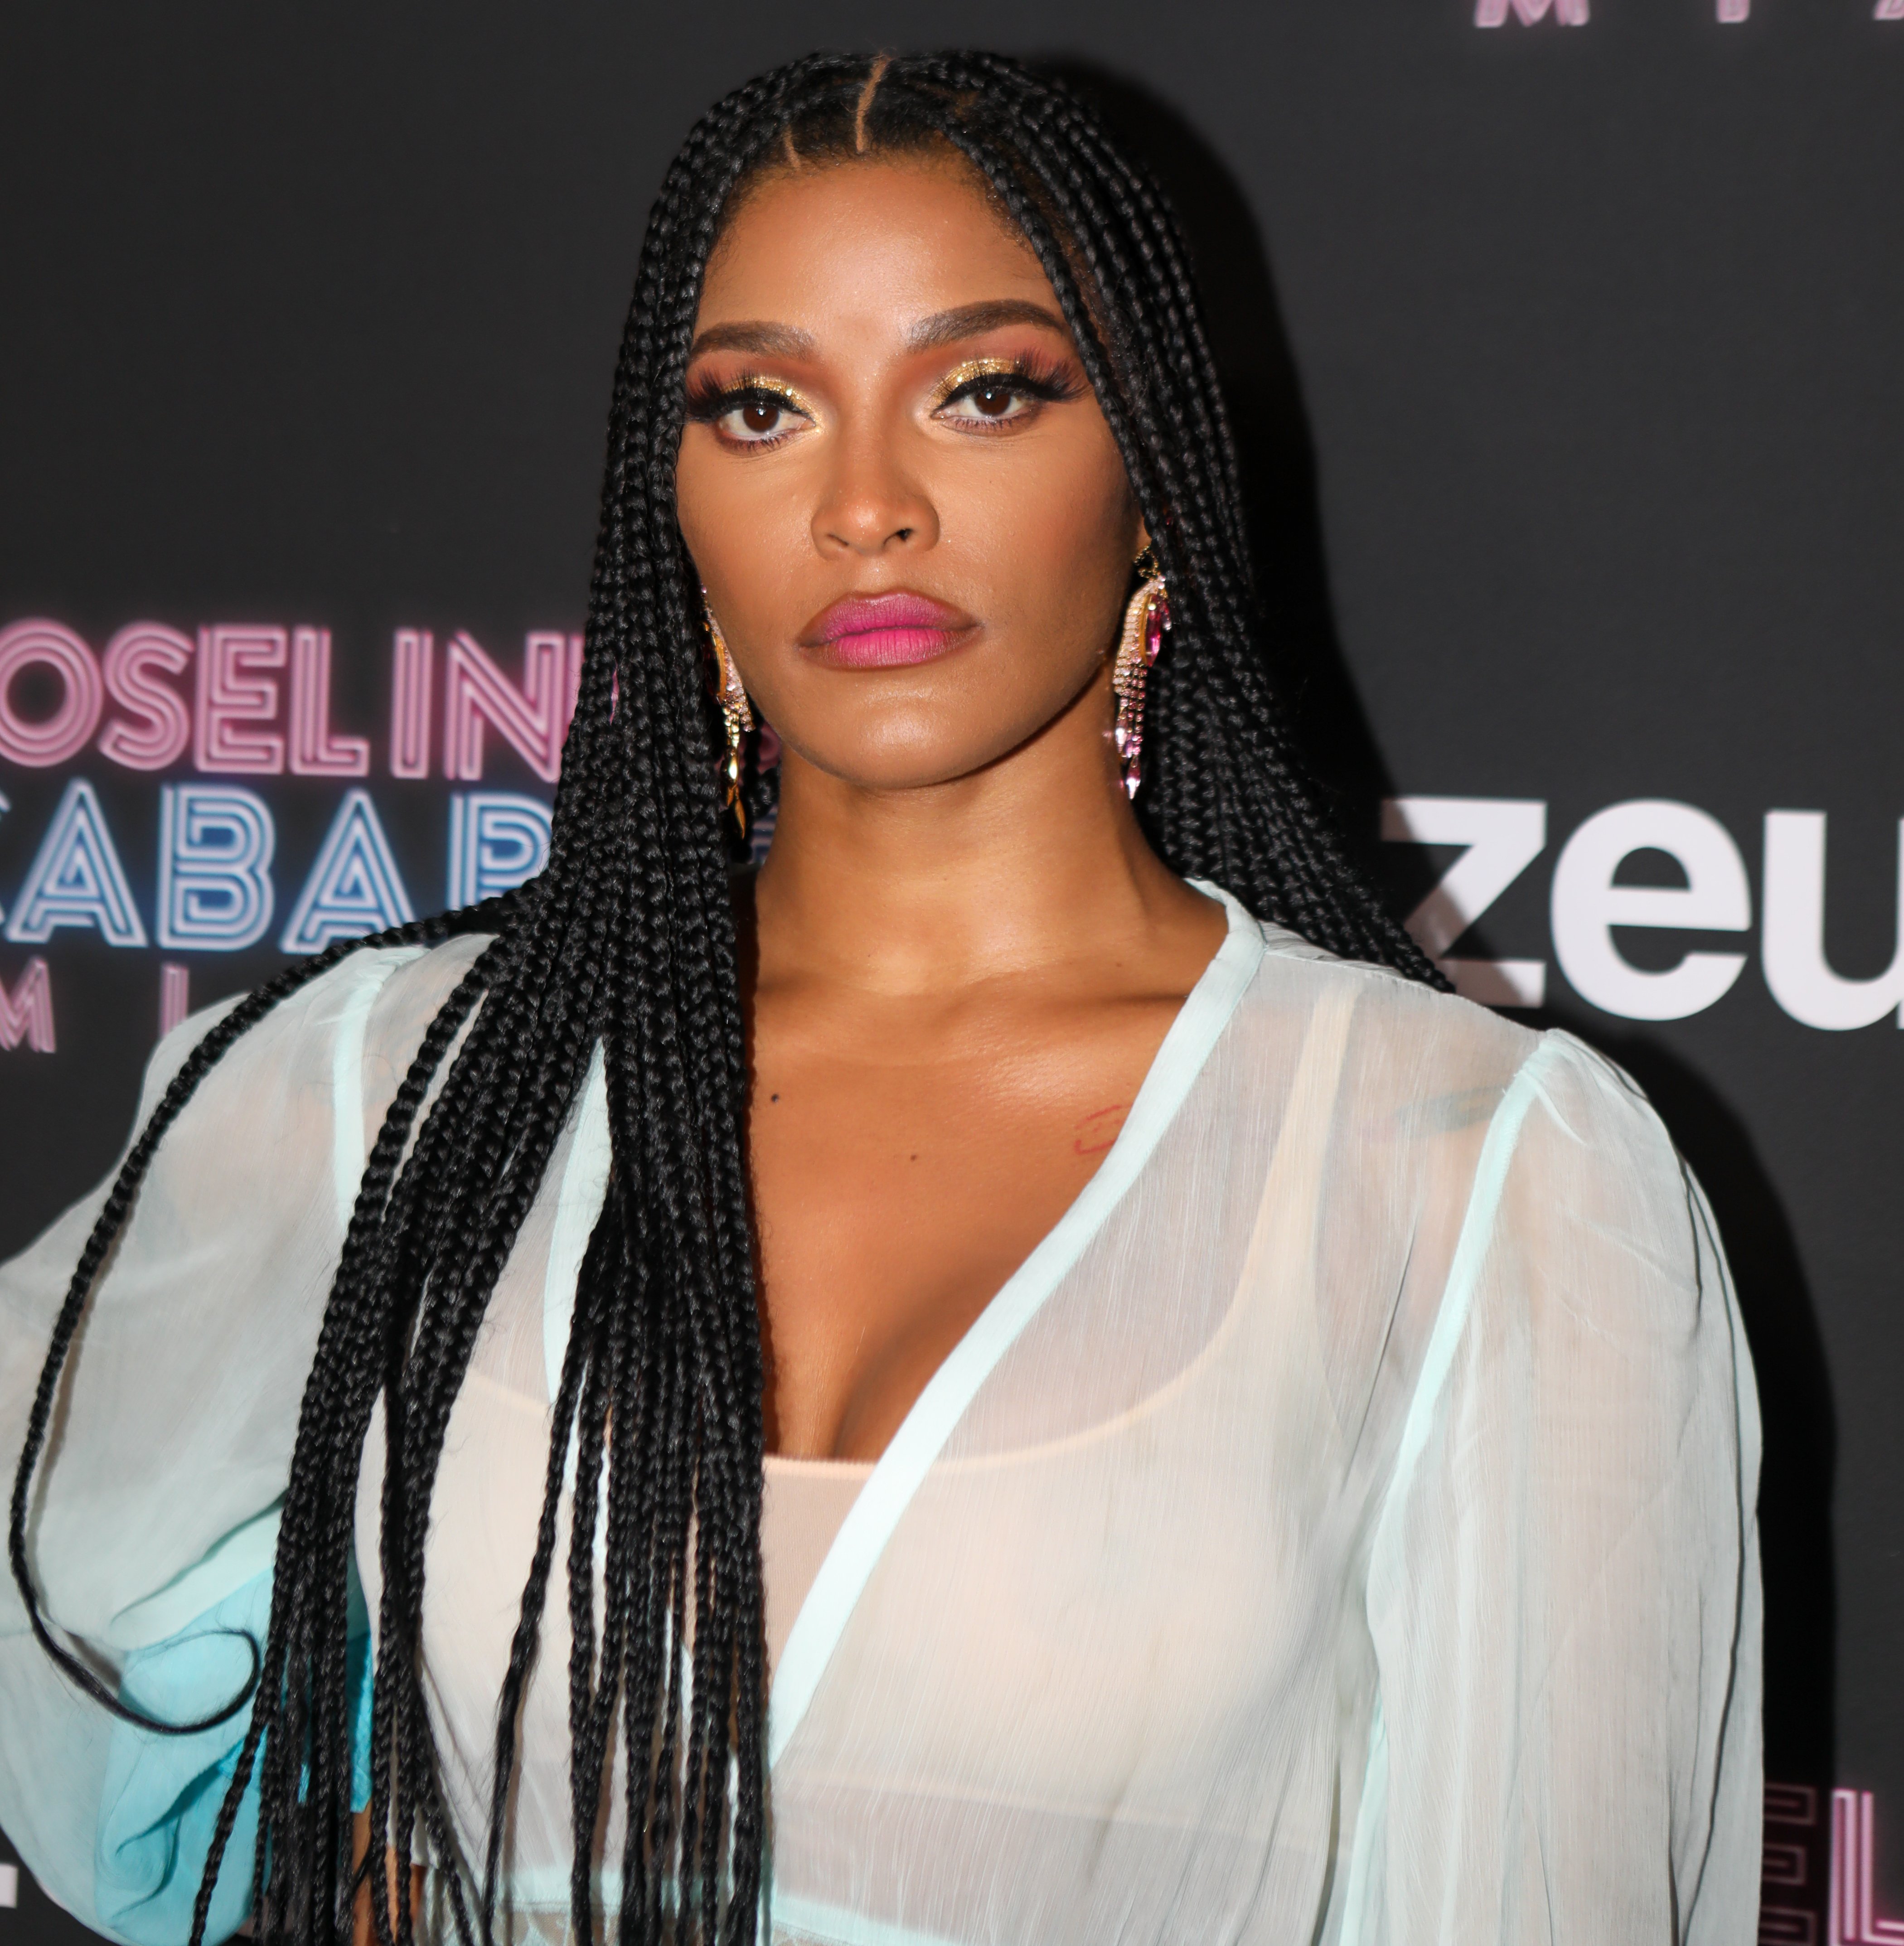 Joseline Hernandez at the premiere of "Joseline's Cabaret Miami" on January 19, 2020, in Florida | Source: Getty Images